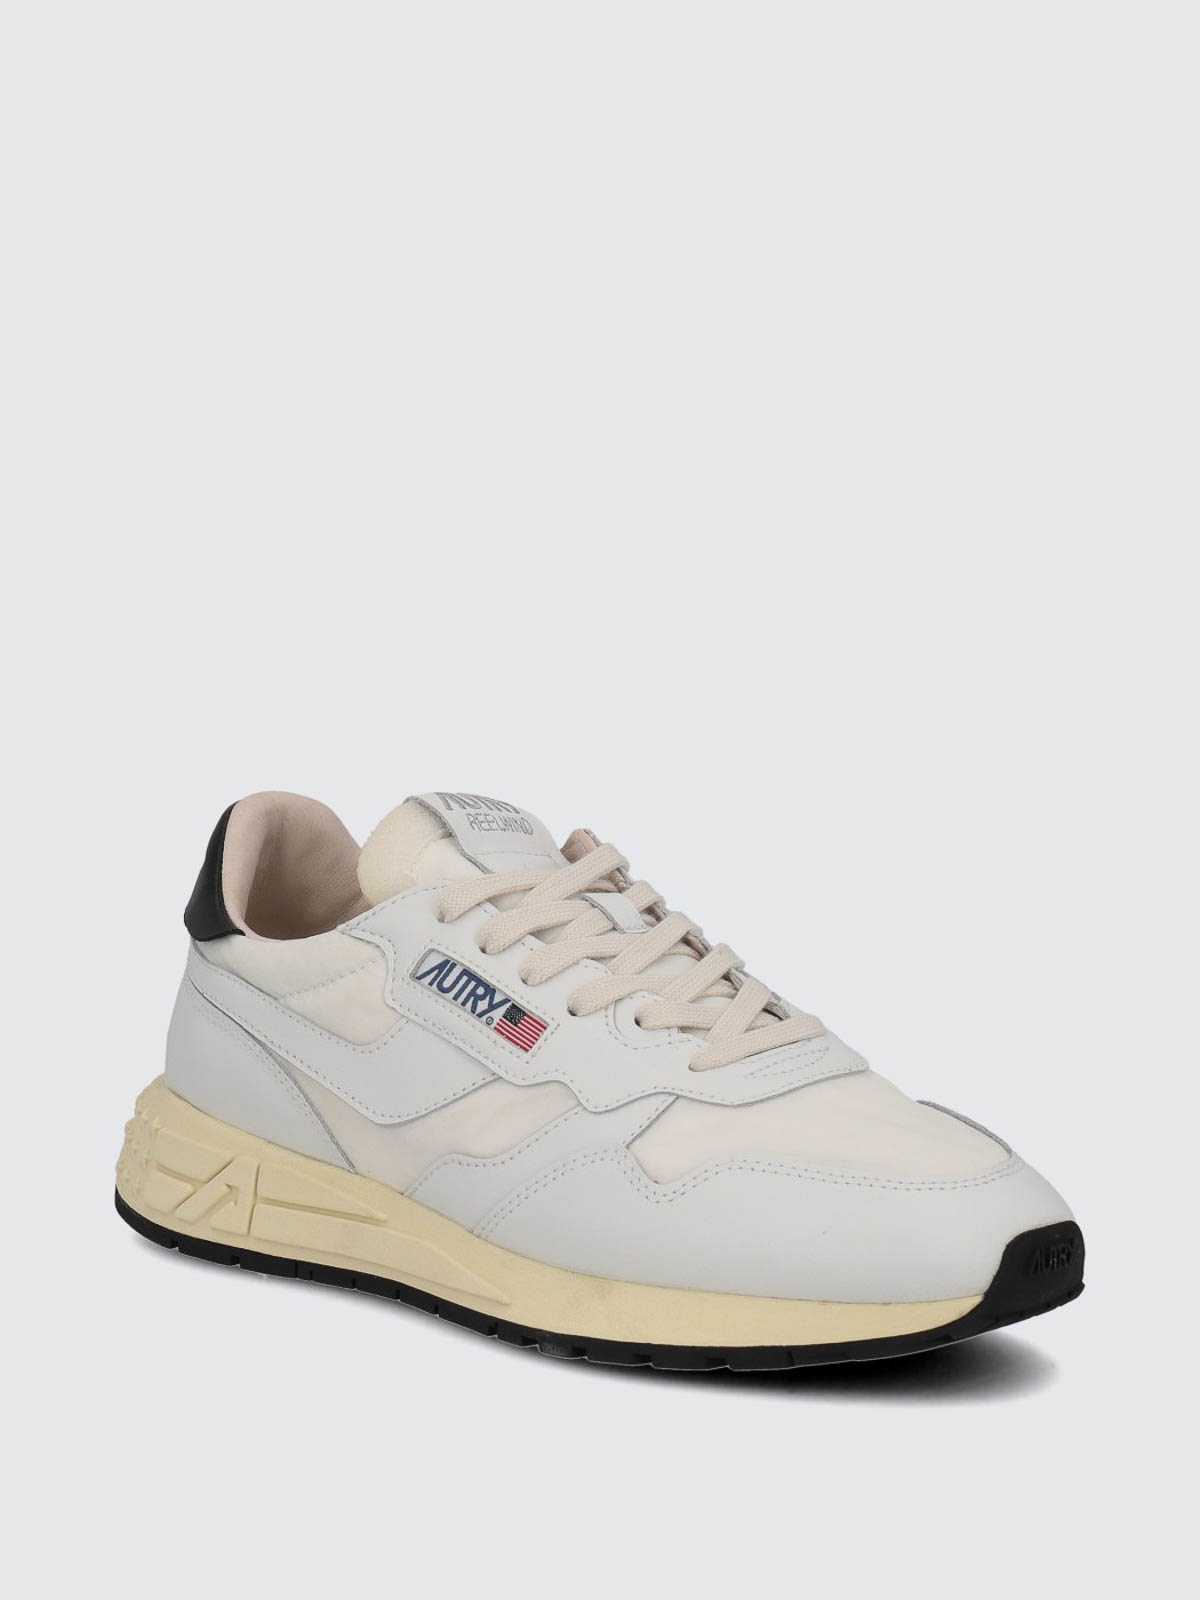 Shop Autry Reelwind Sneakers In White